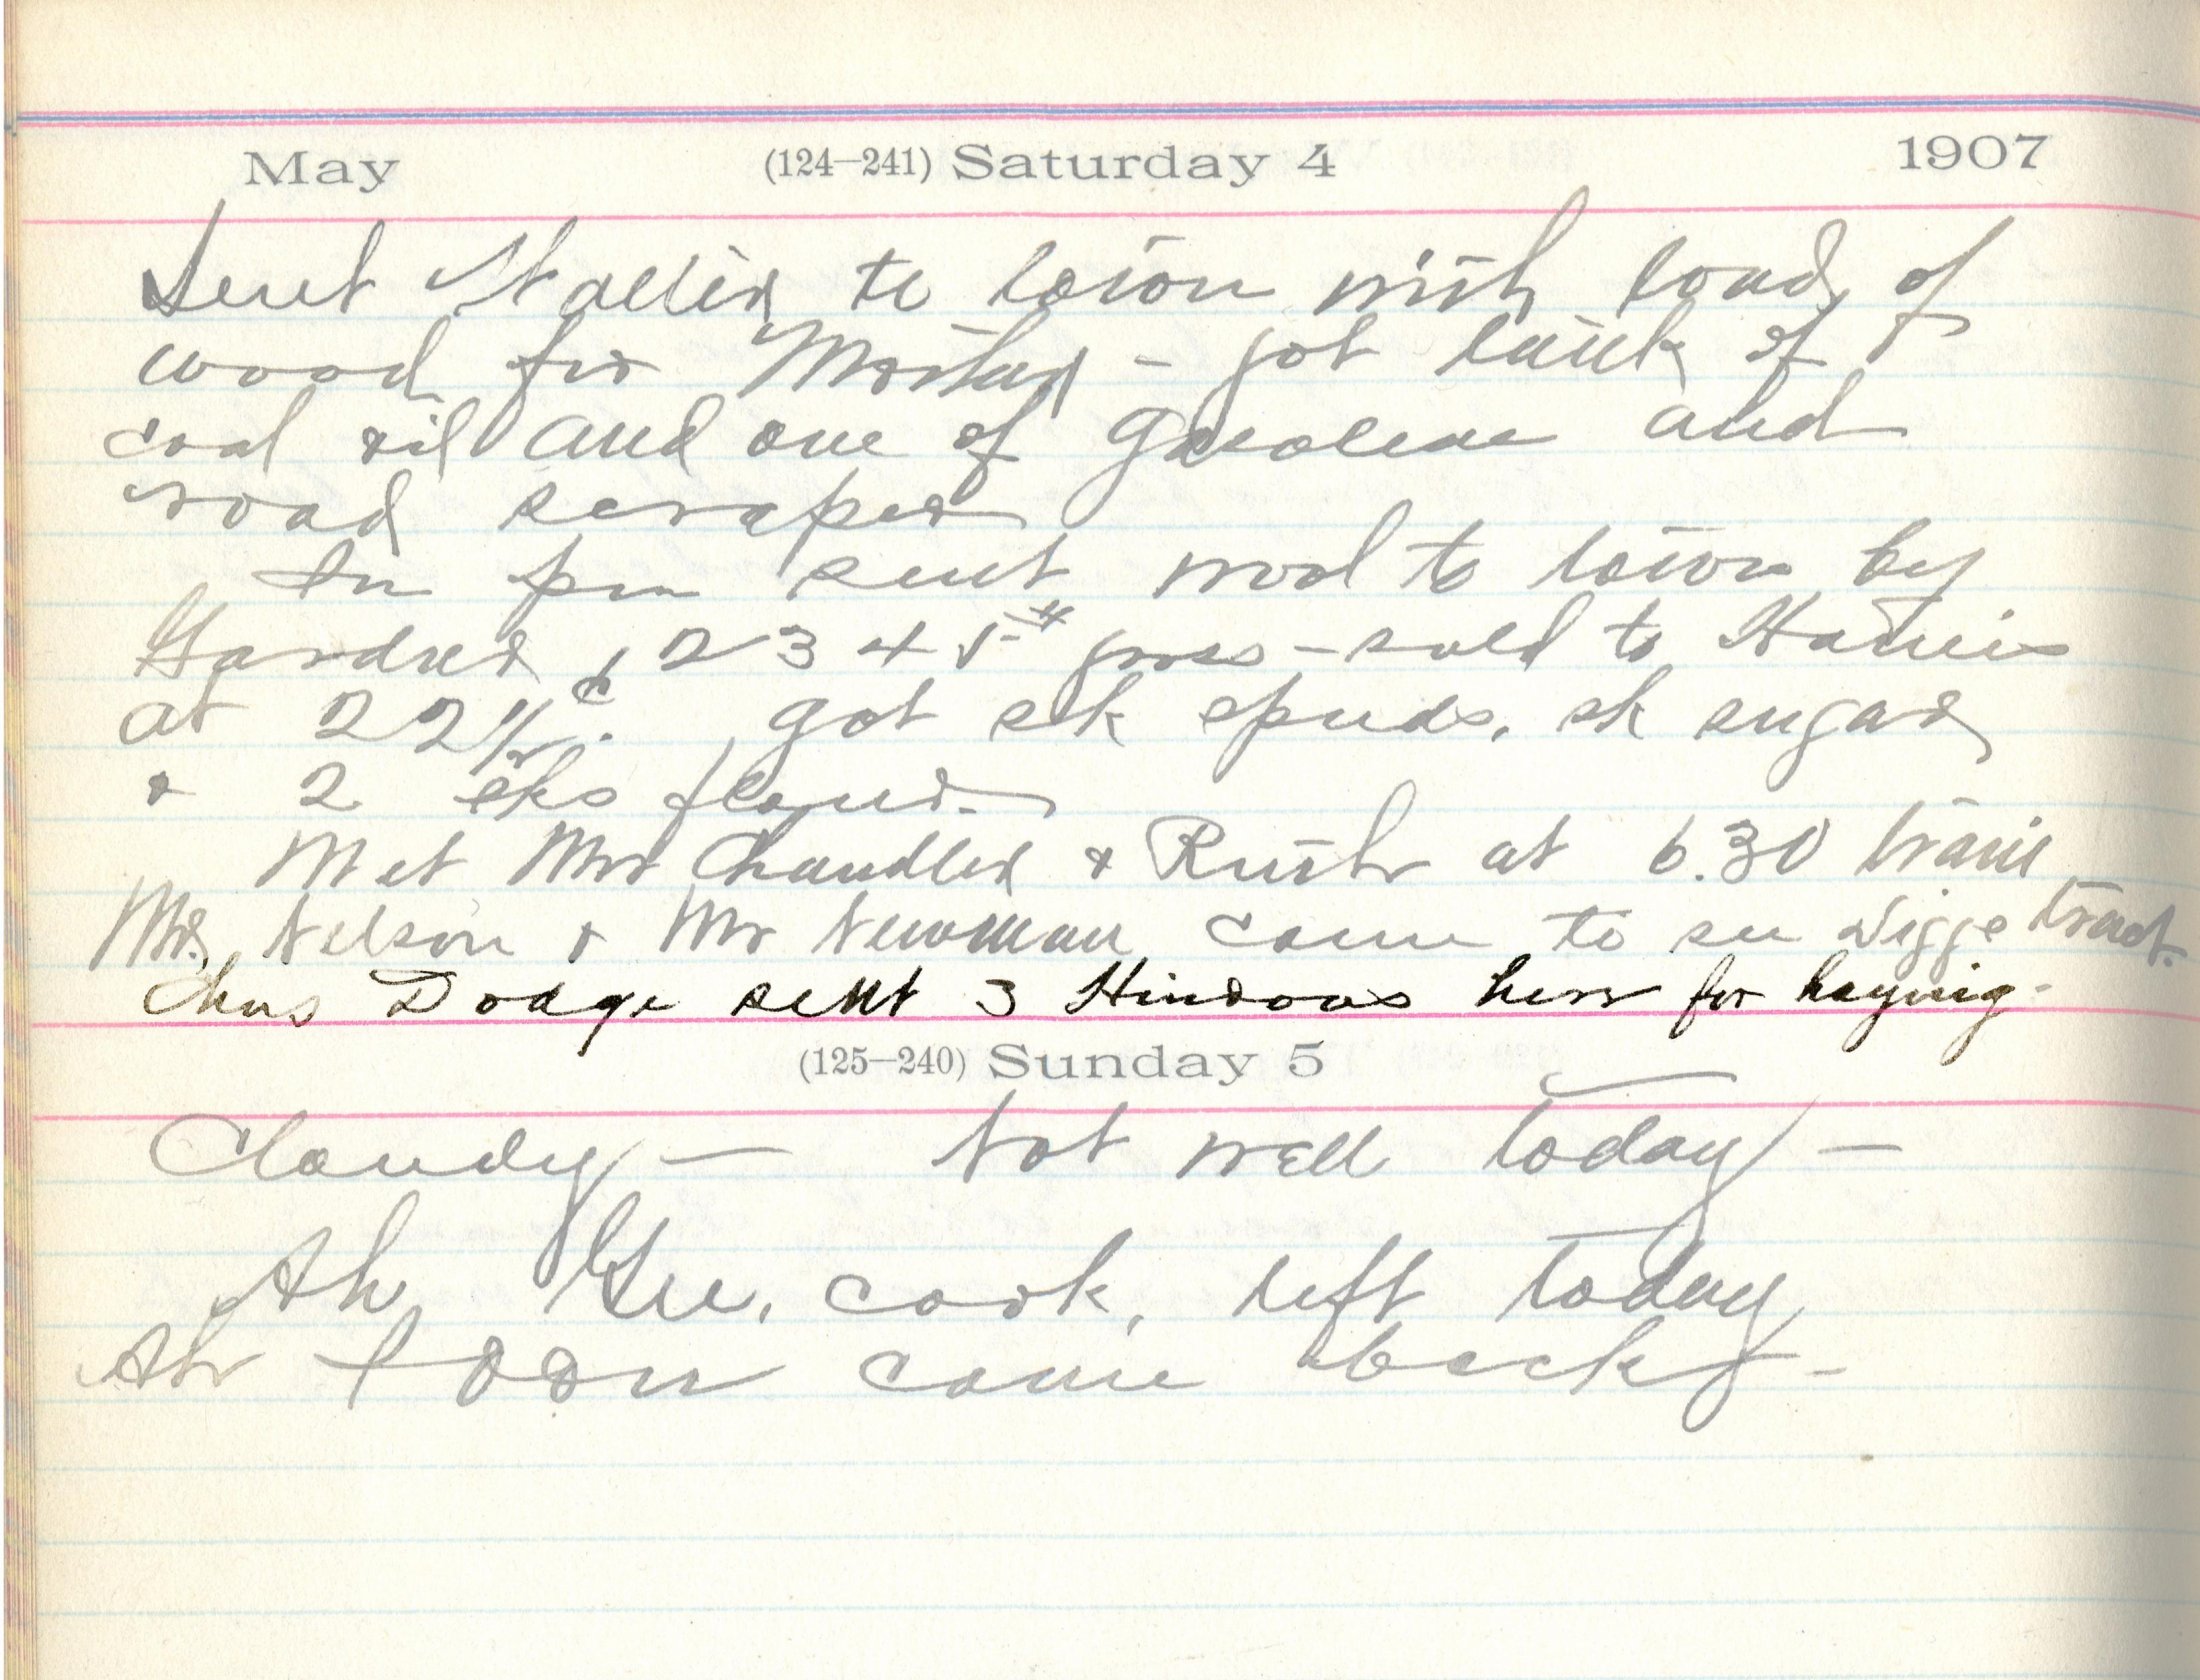 George Pierce, Jr Records Punjabi Farm Workers in Davis, California in His Diary on May 4, 1907. Pierce Family Papers, Special Collections, University of California, Davis Library.